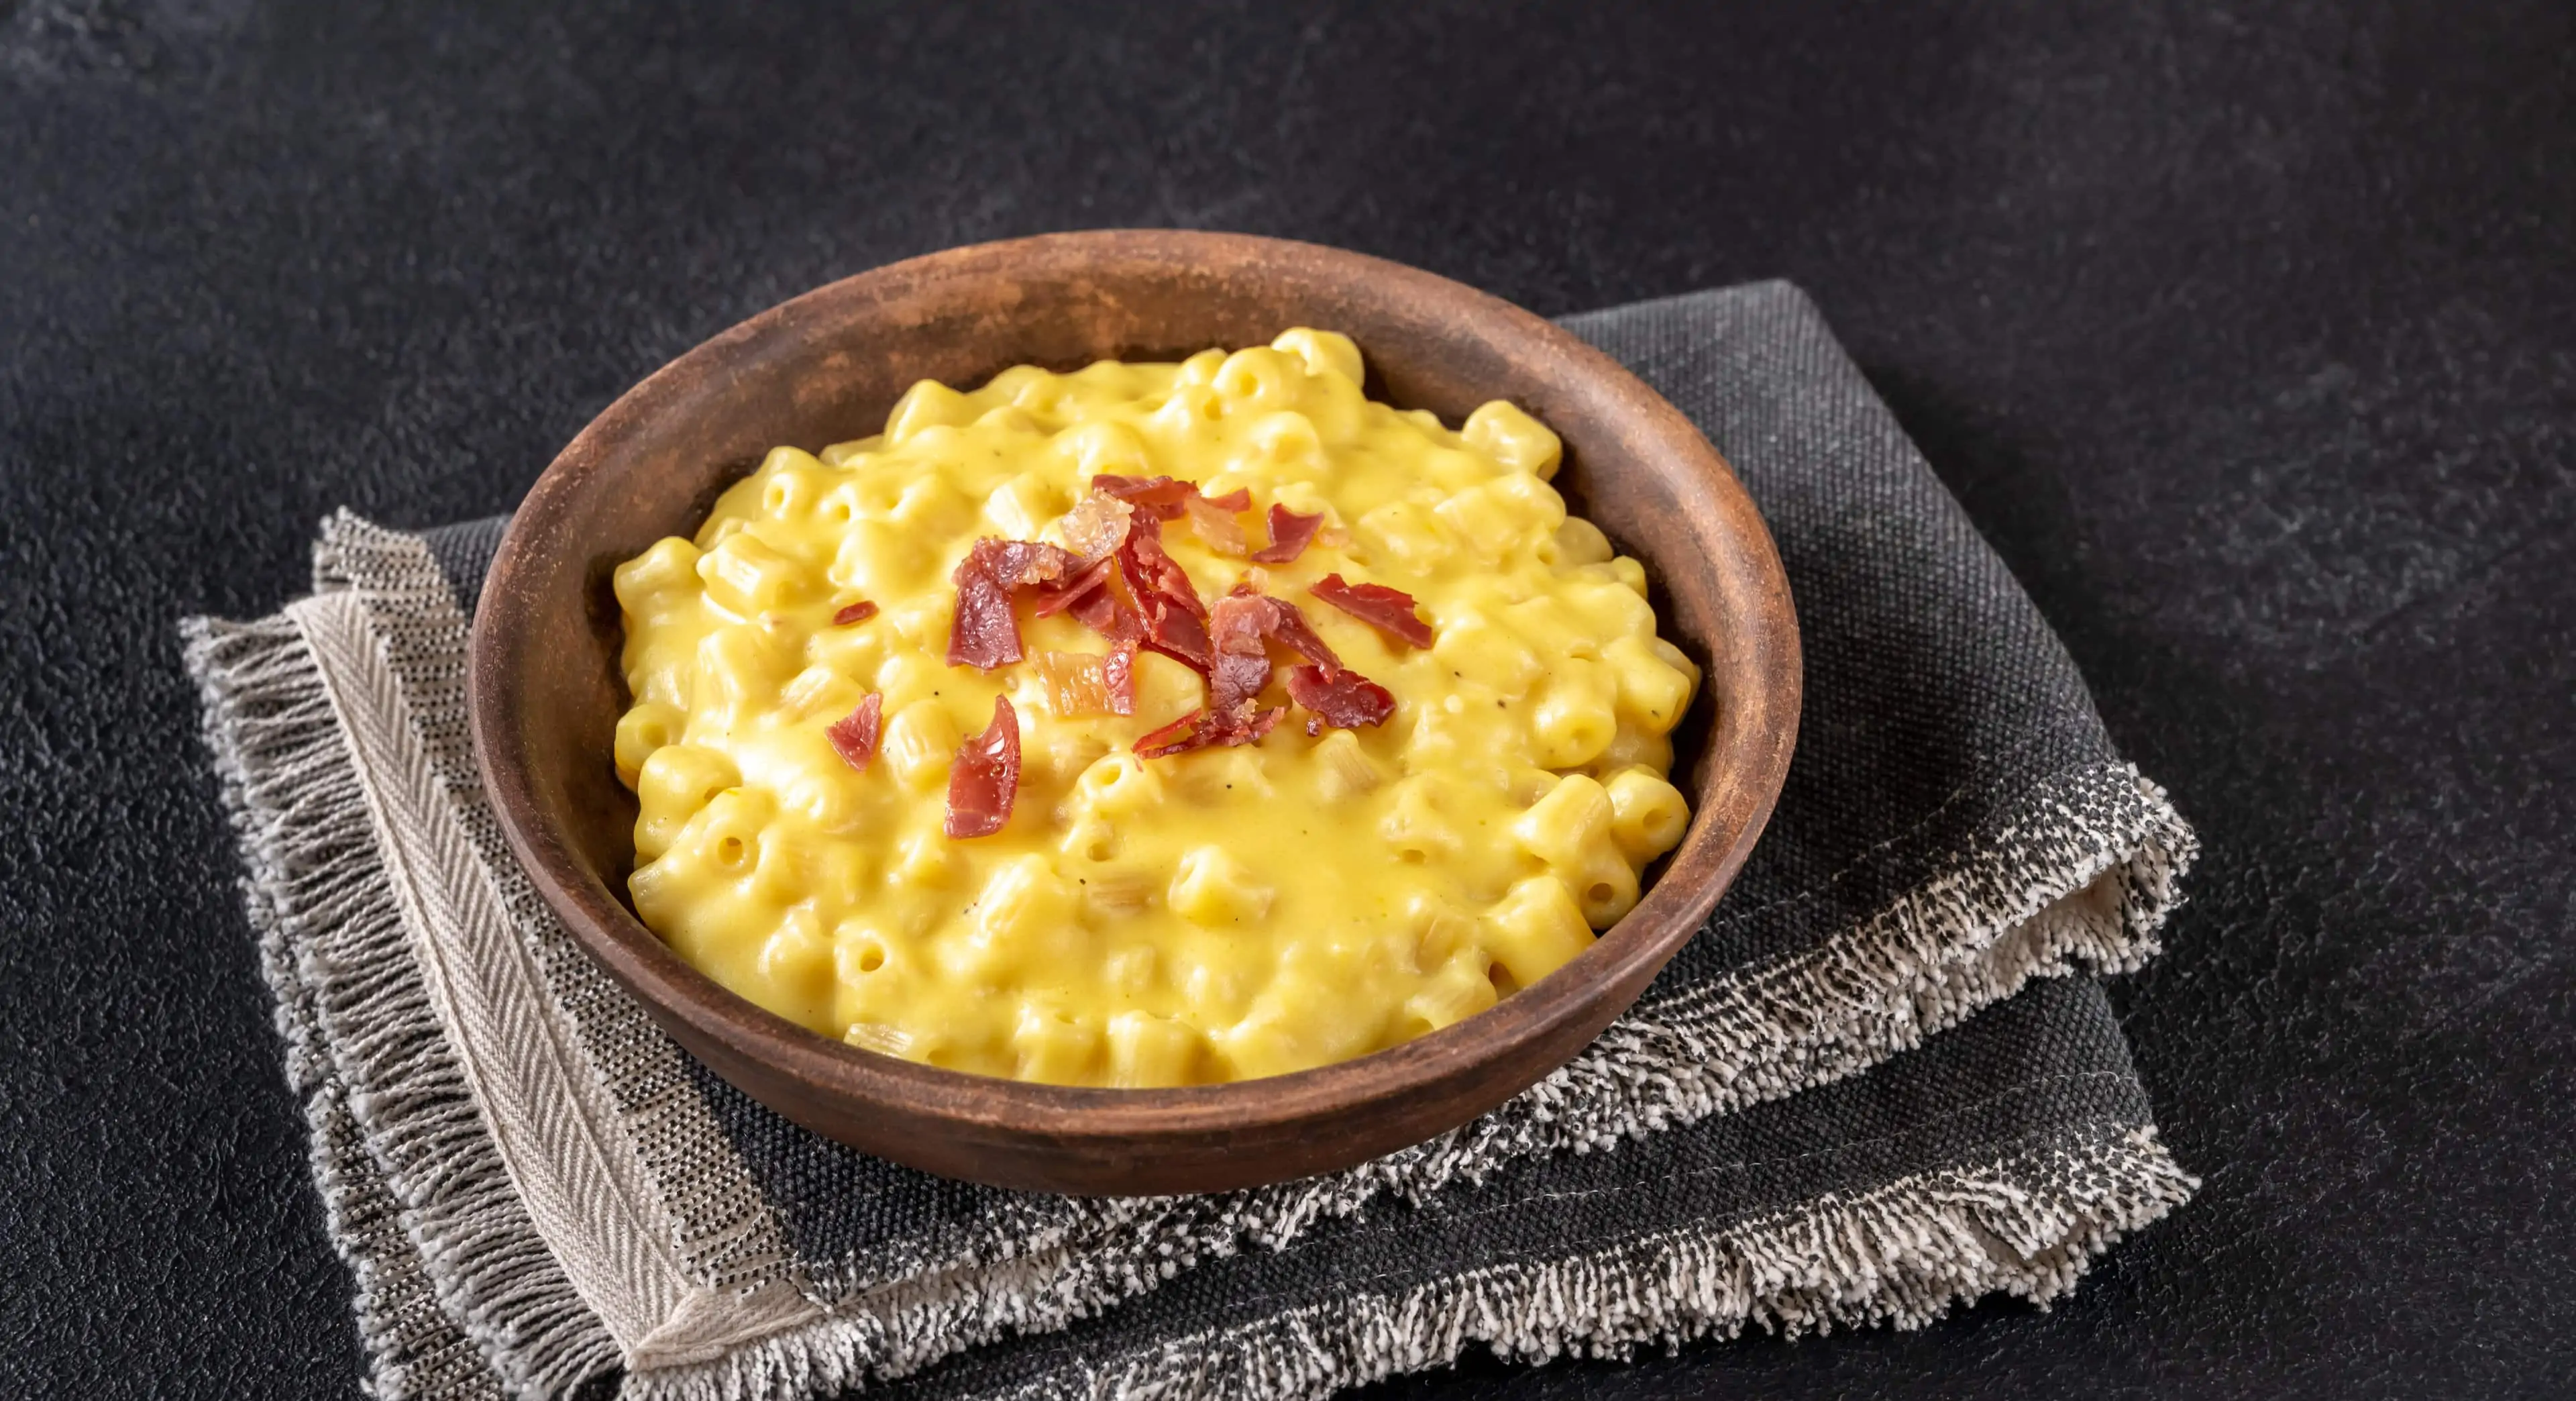 A bowl of Morrisons macaroni cheese with fried bacon